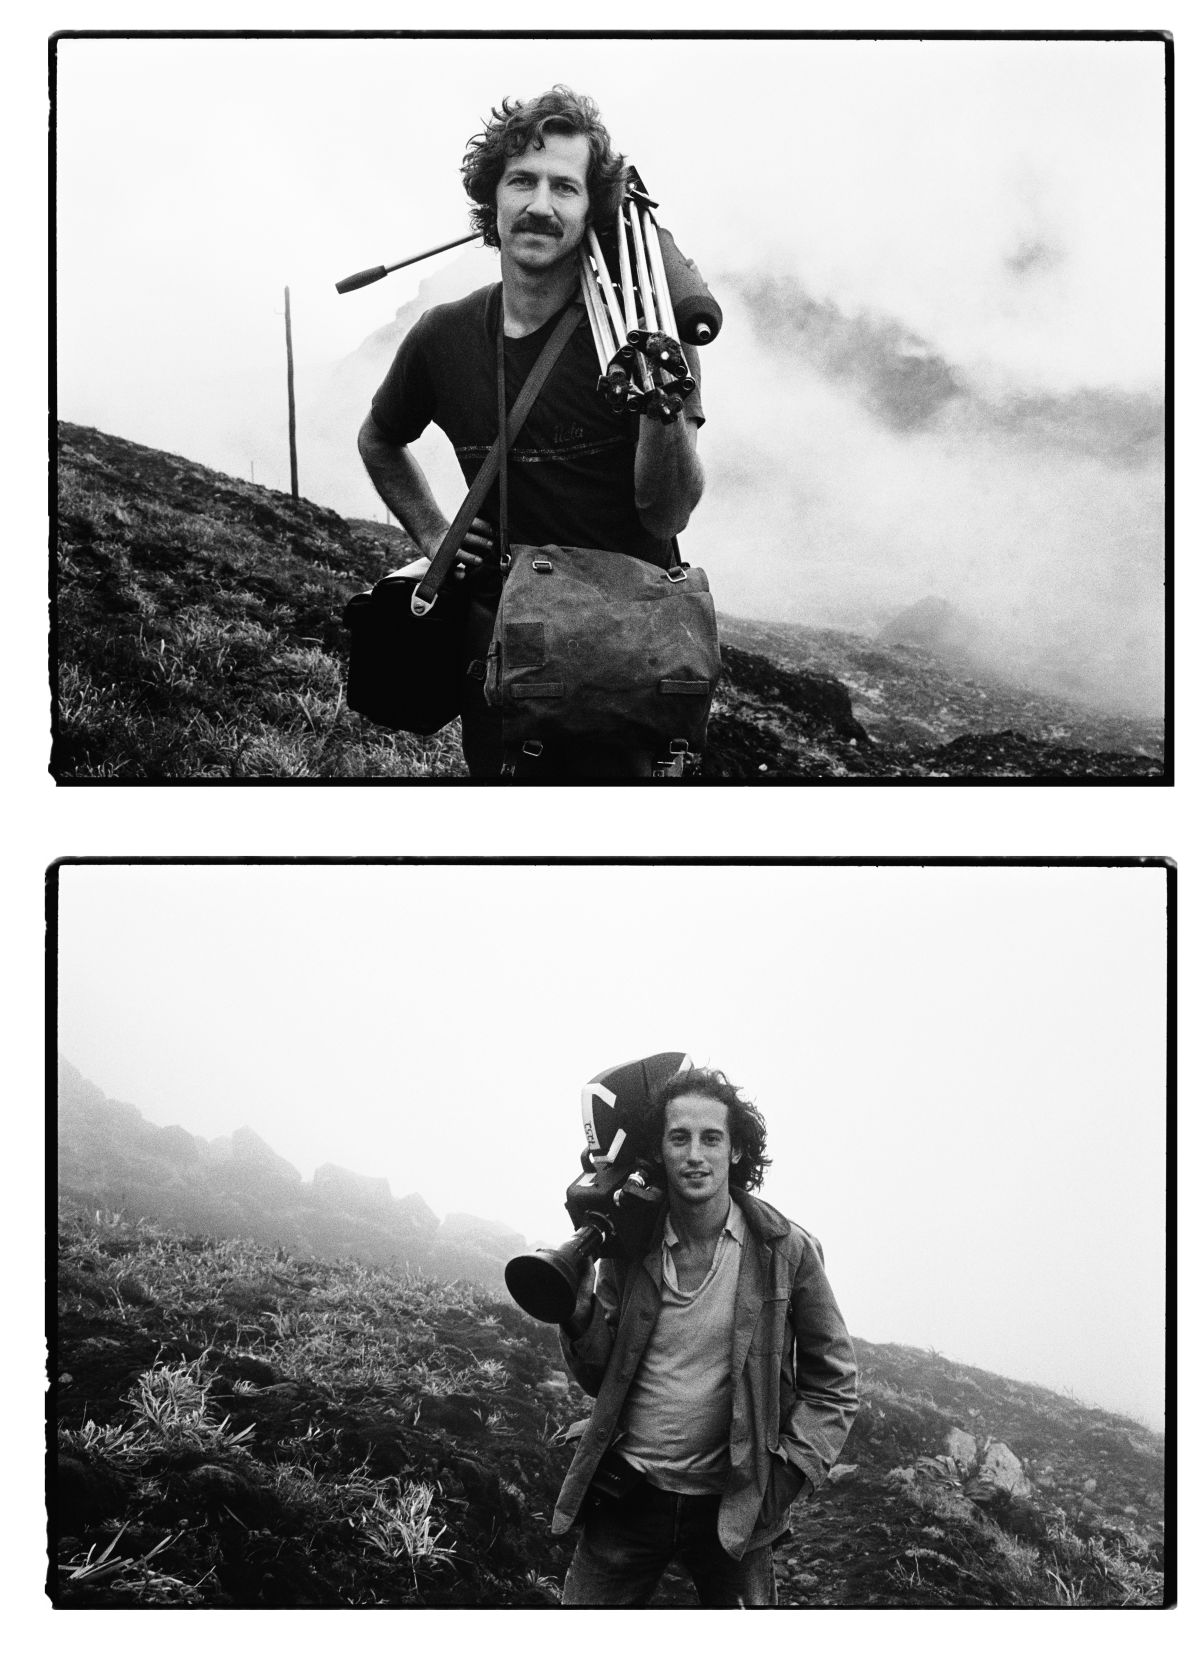 Herzog (with a Nagra recorder and sticks) prepares to climb an active volcano that is threatening to erupt. He’s there to shoot footage for his documentary La Soufrière — Waiting for an Inevitable Disaster (1976) on the island of Guadeloupe, along with his trusting cinematographer, Edward Lachman, ASC.